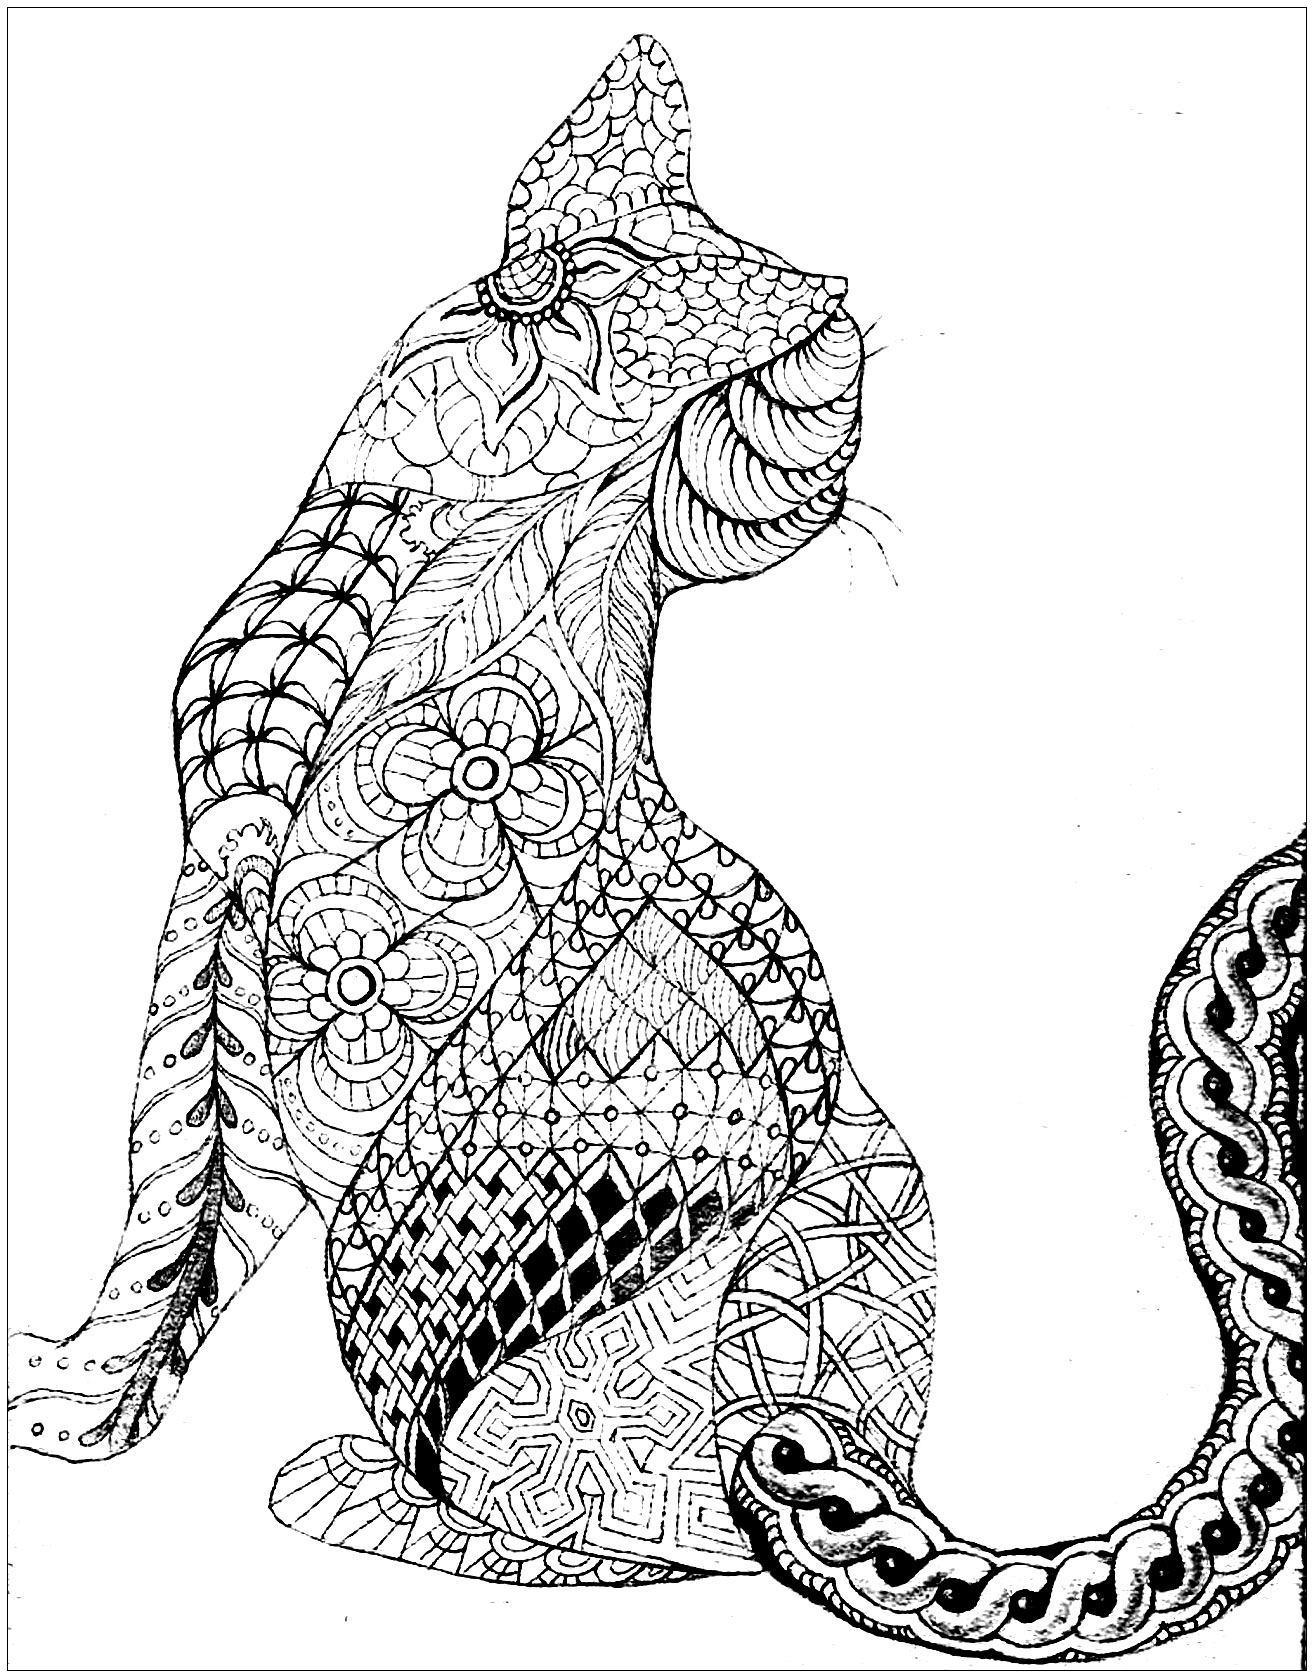 Zentangle Cat Coloring Pages at GetColorings.com | Free printable